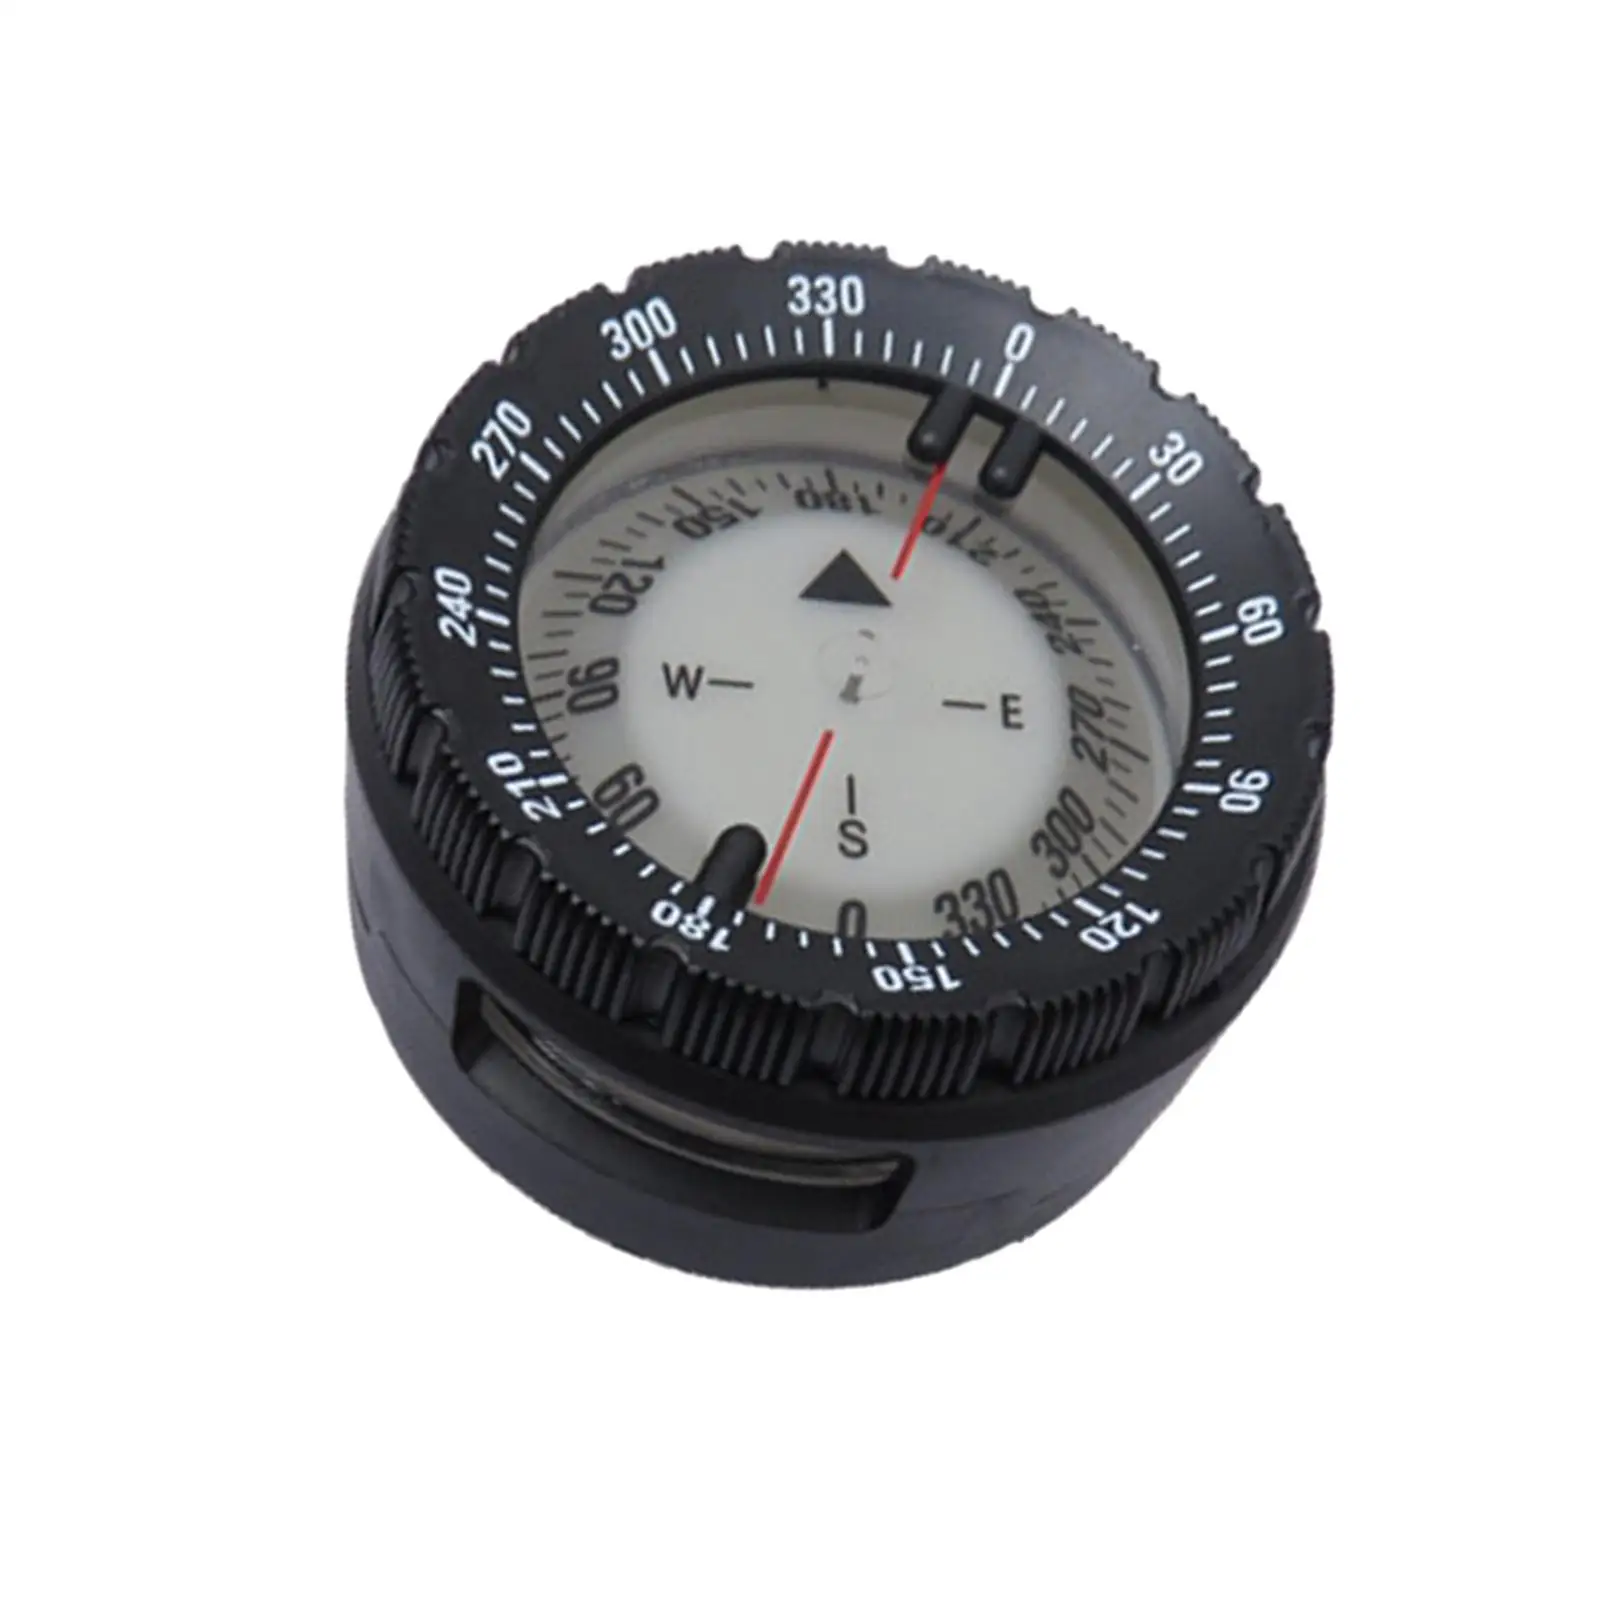 Camping Survival Compass Classic Pocket Compass Luminous Compass for Outdoor Climbing Backpacking Orienteering Camping